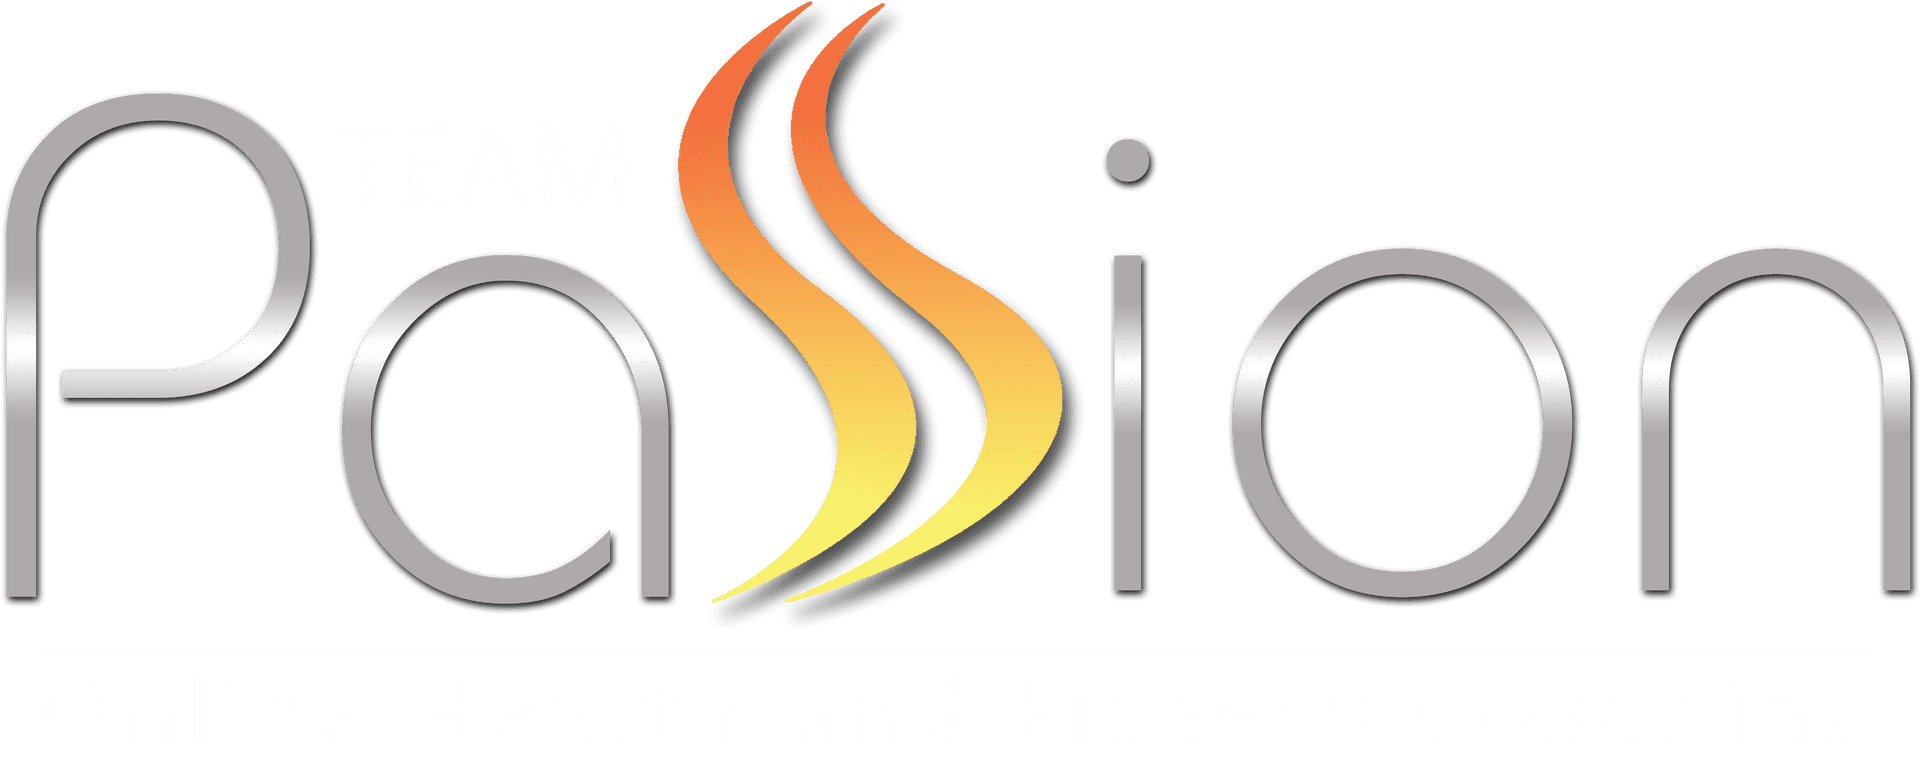 Team Passion Online Health Fitness Coaching Logo PNG